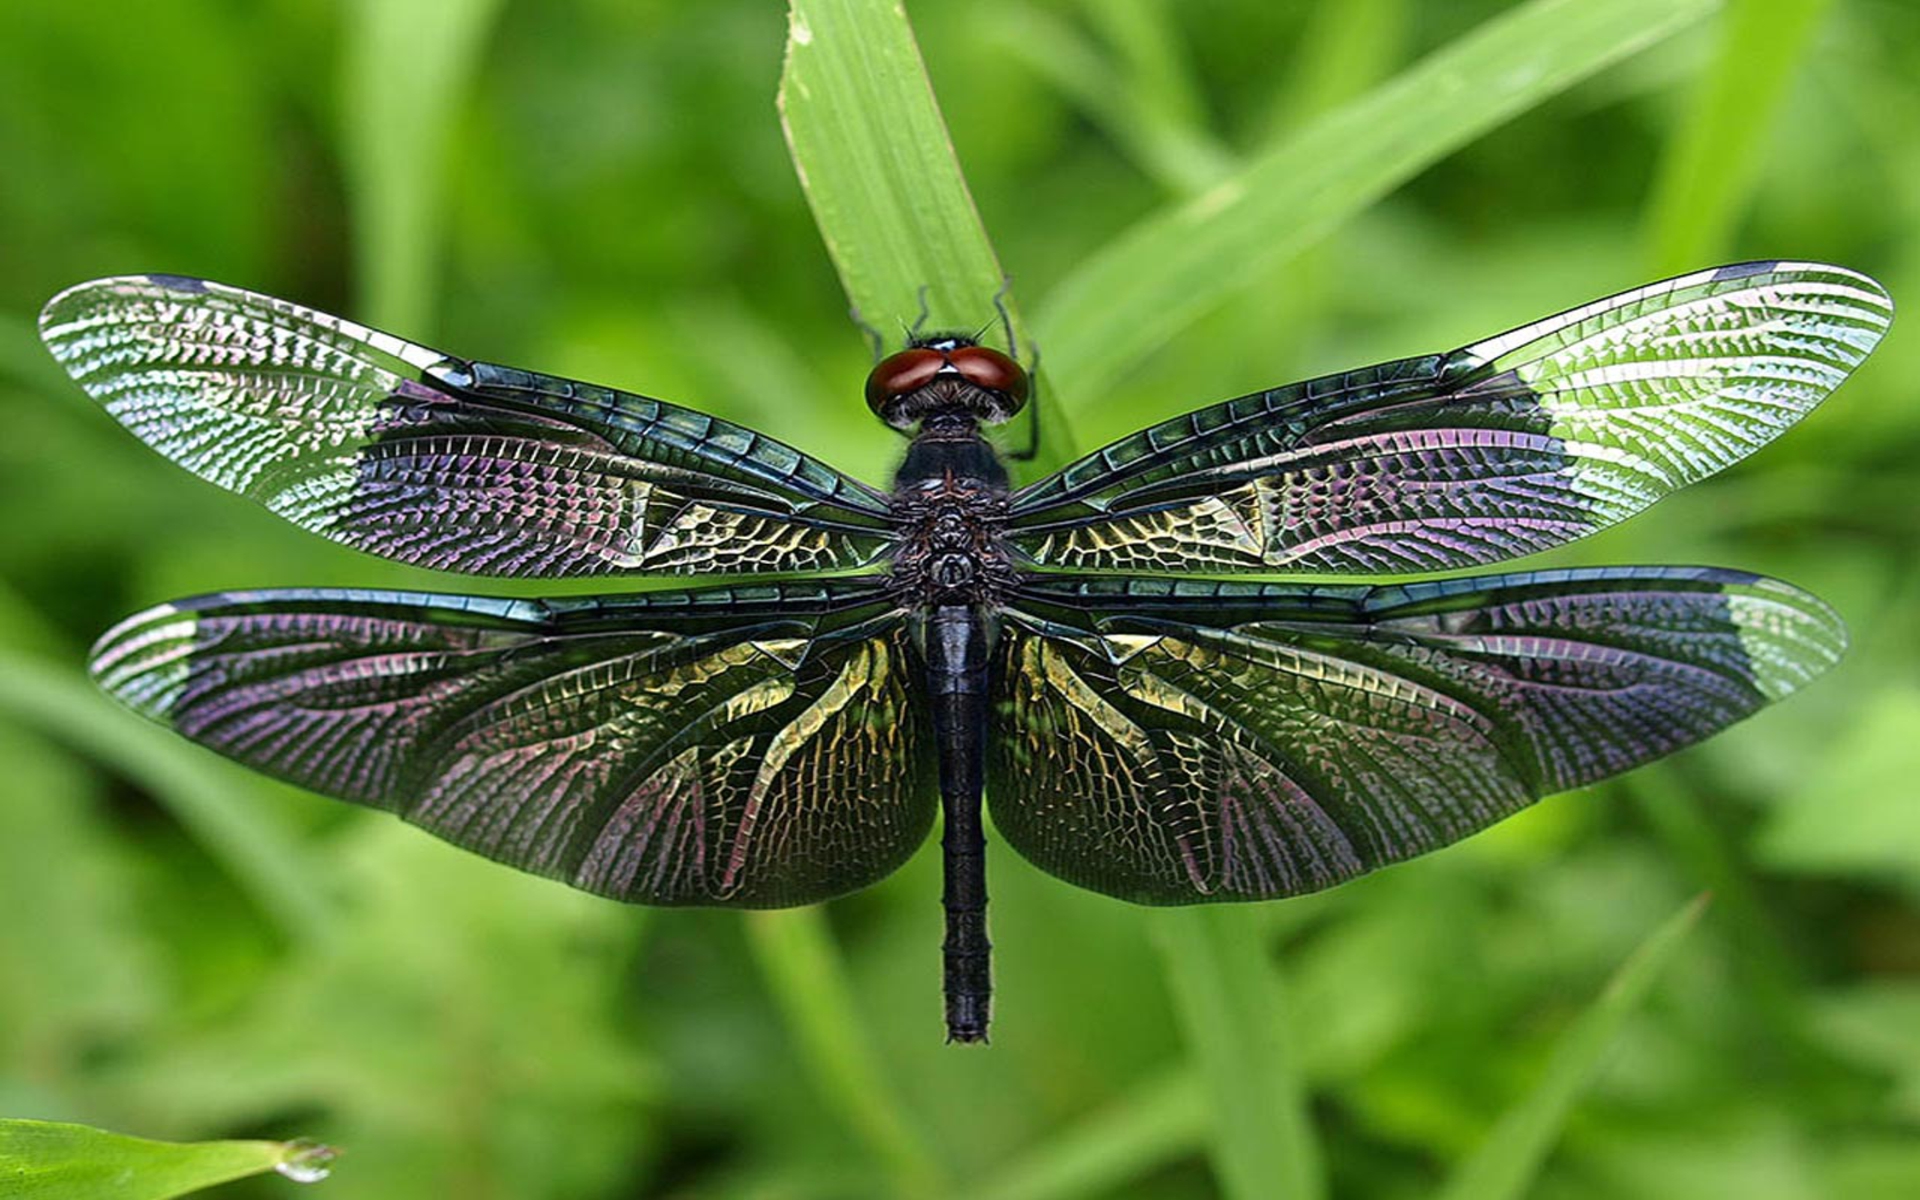 DOWNLOAD: dragonfly dark insect wallpapers free picture 2560 x 1600